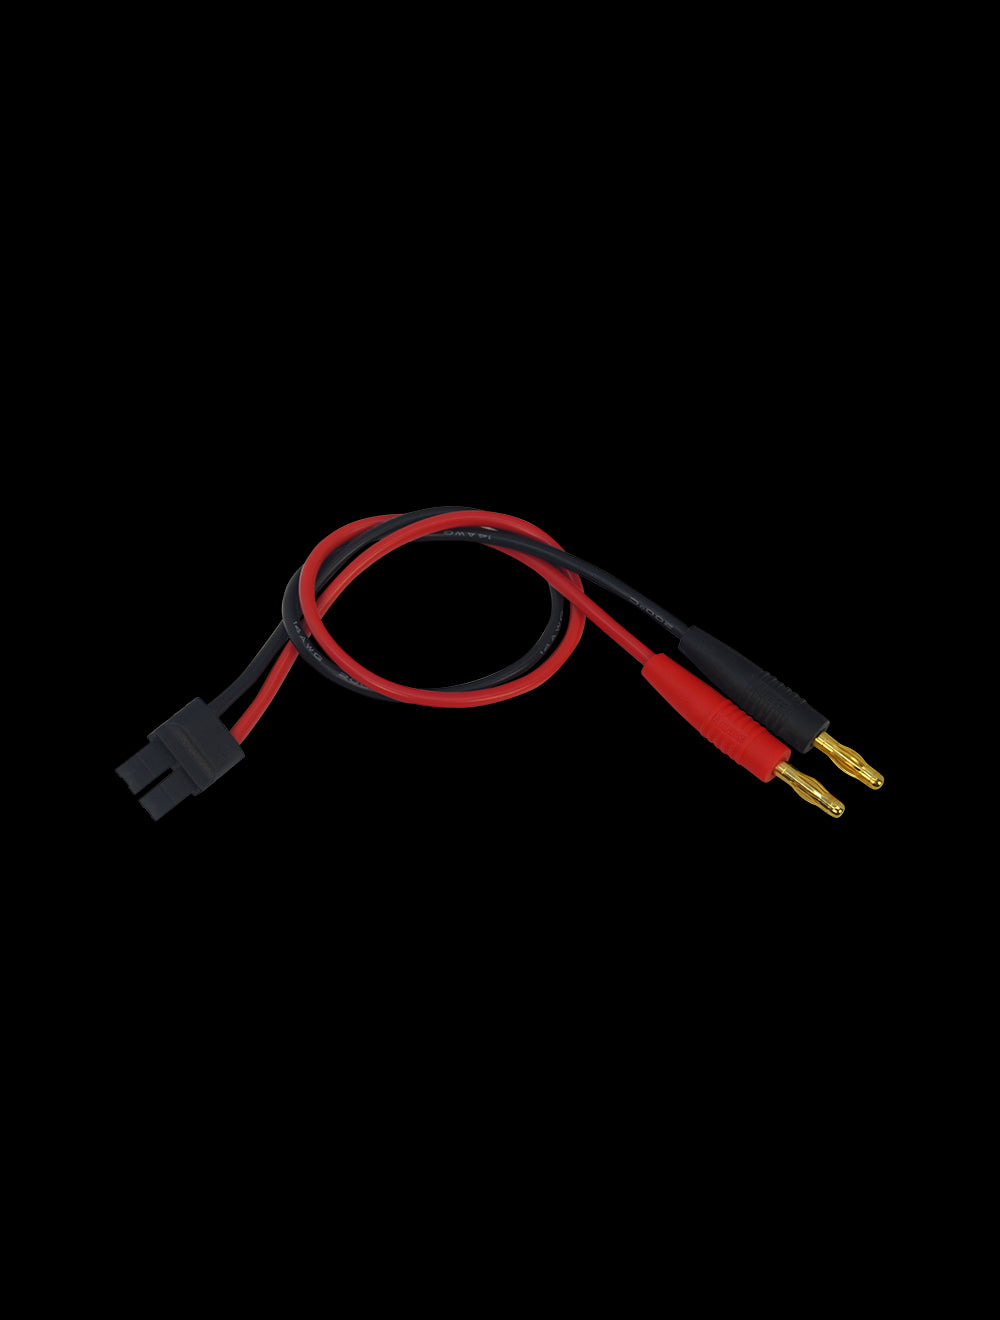 Overlander Traxxas to 4mm Gold Connectors Charge Lead 3188